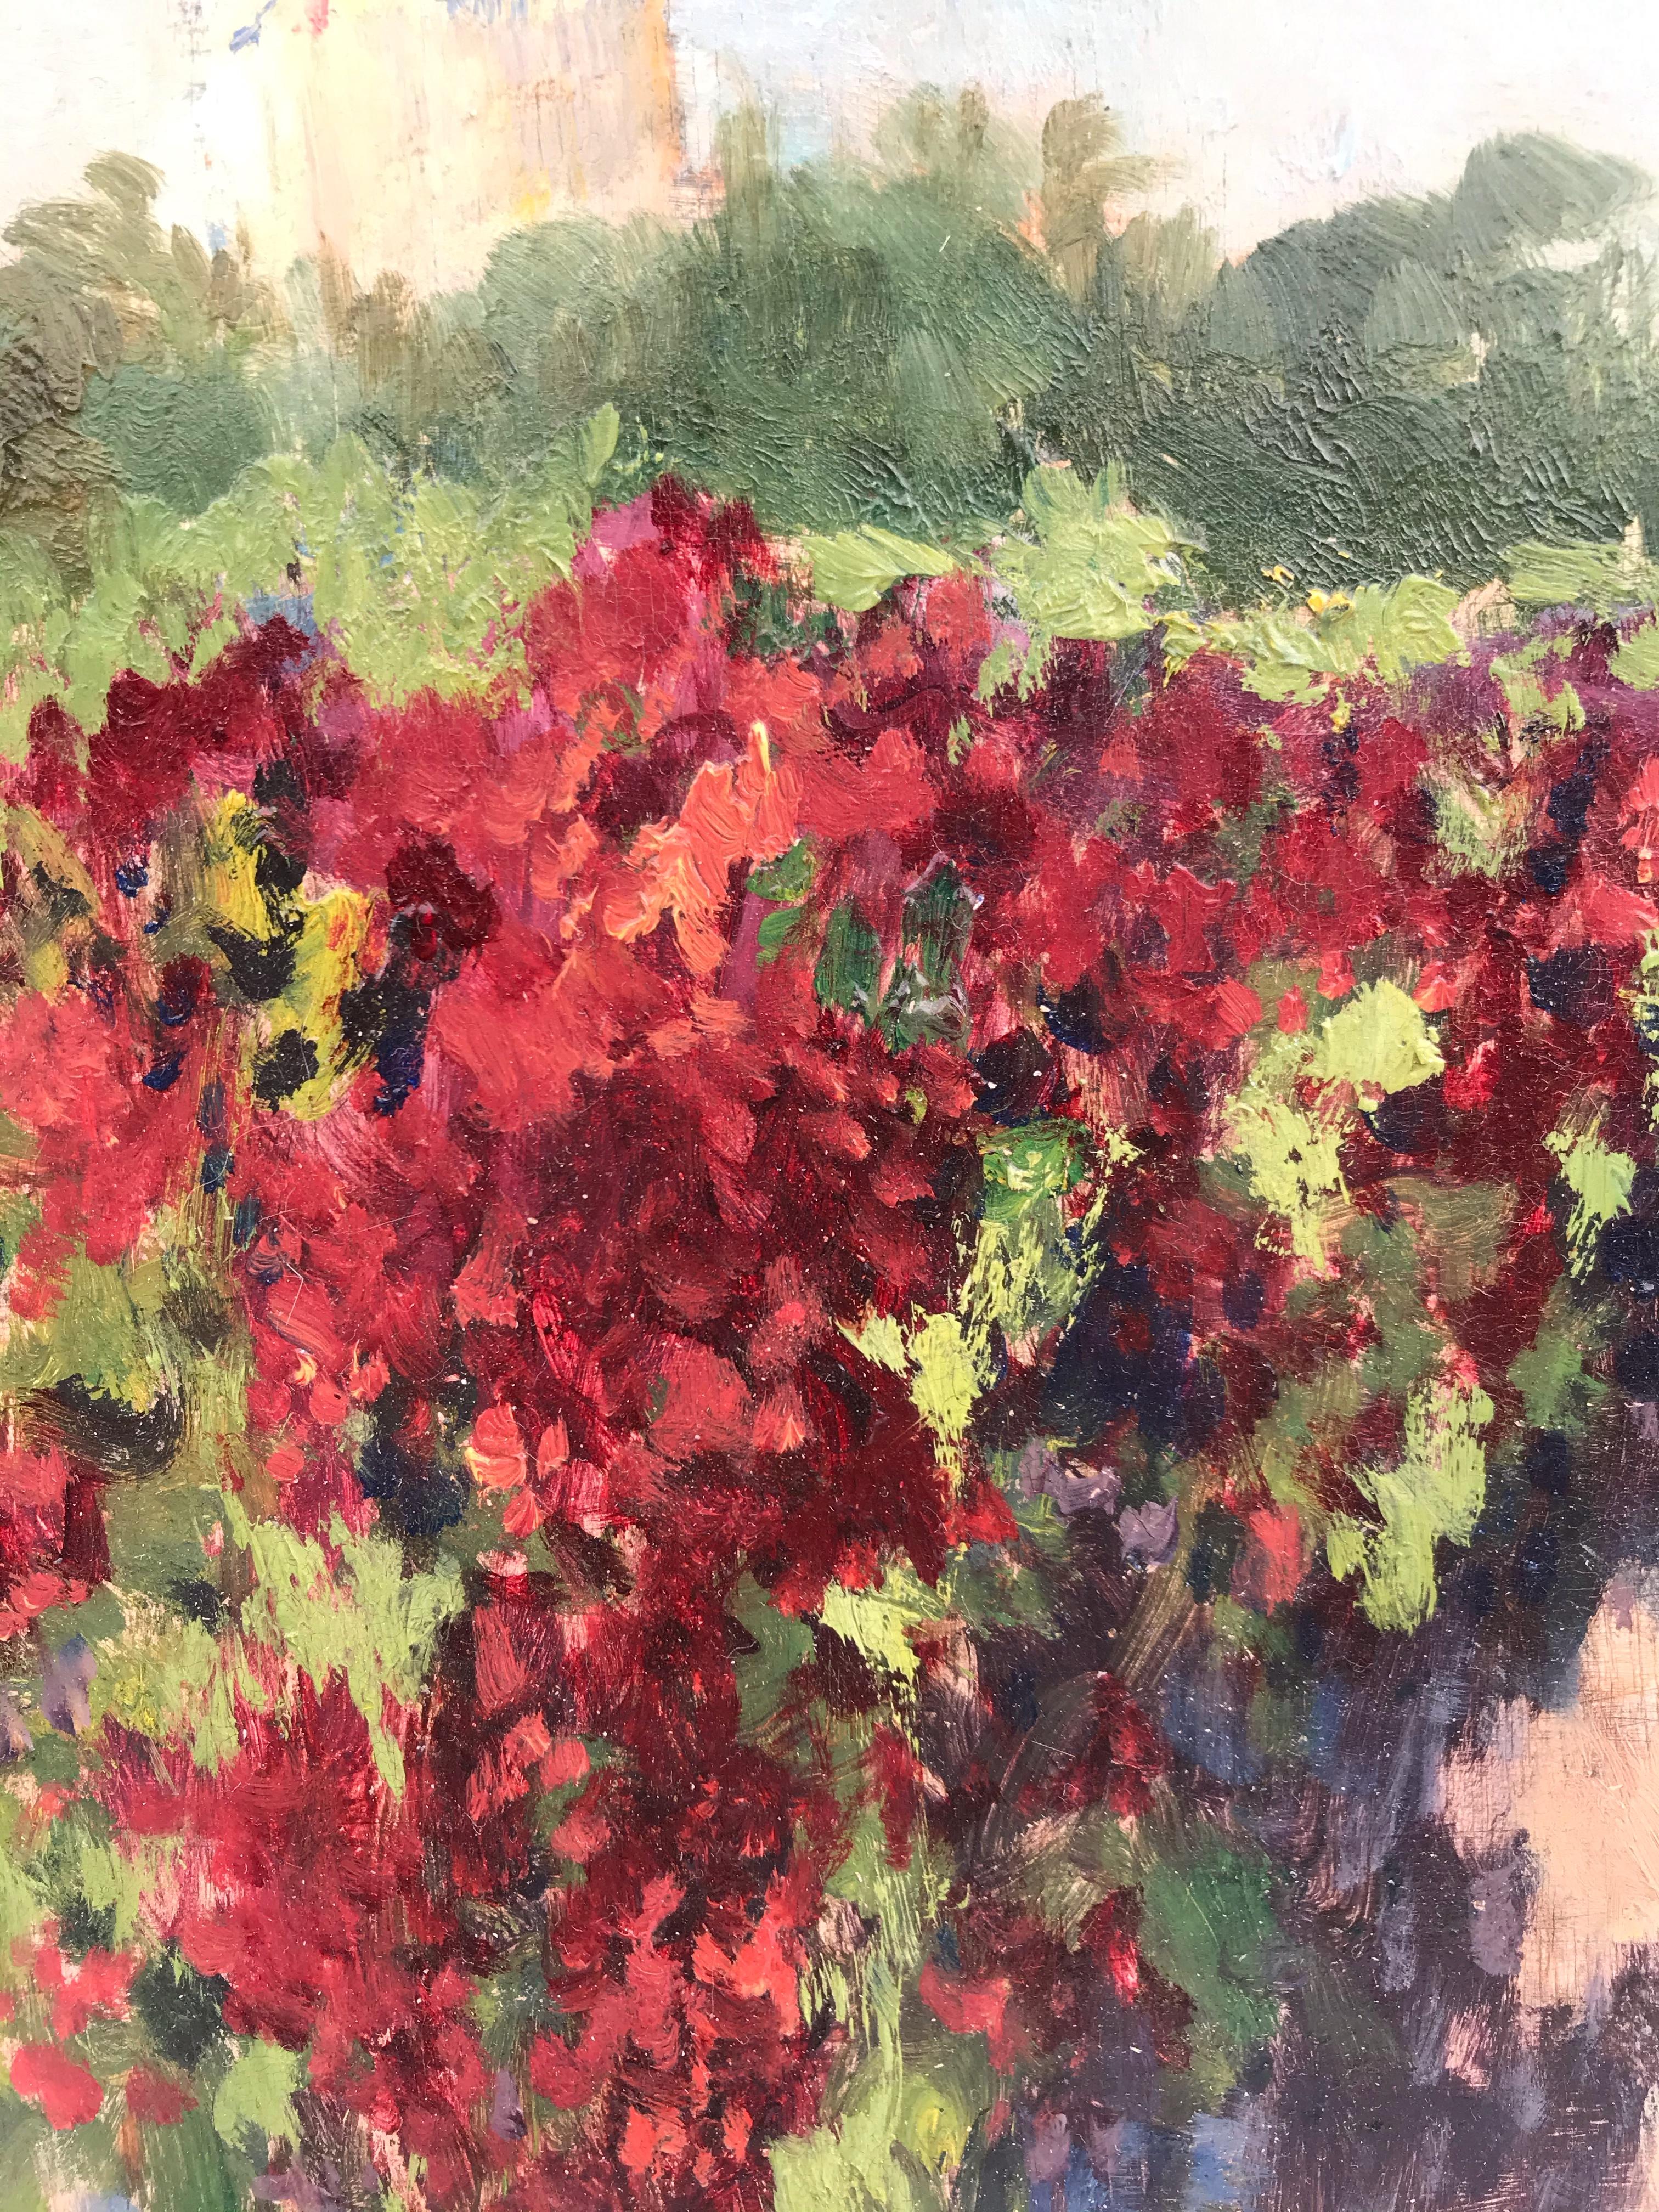 Next to the Bougainvillea  - Orientalist Painting   1